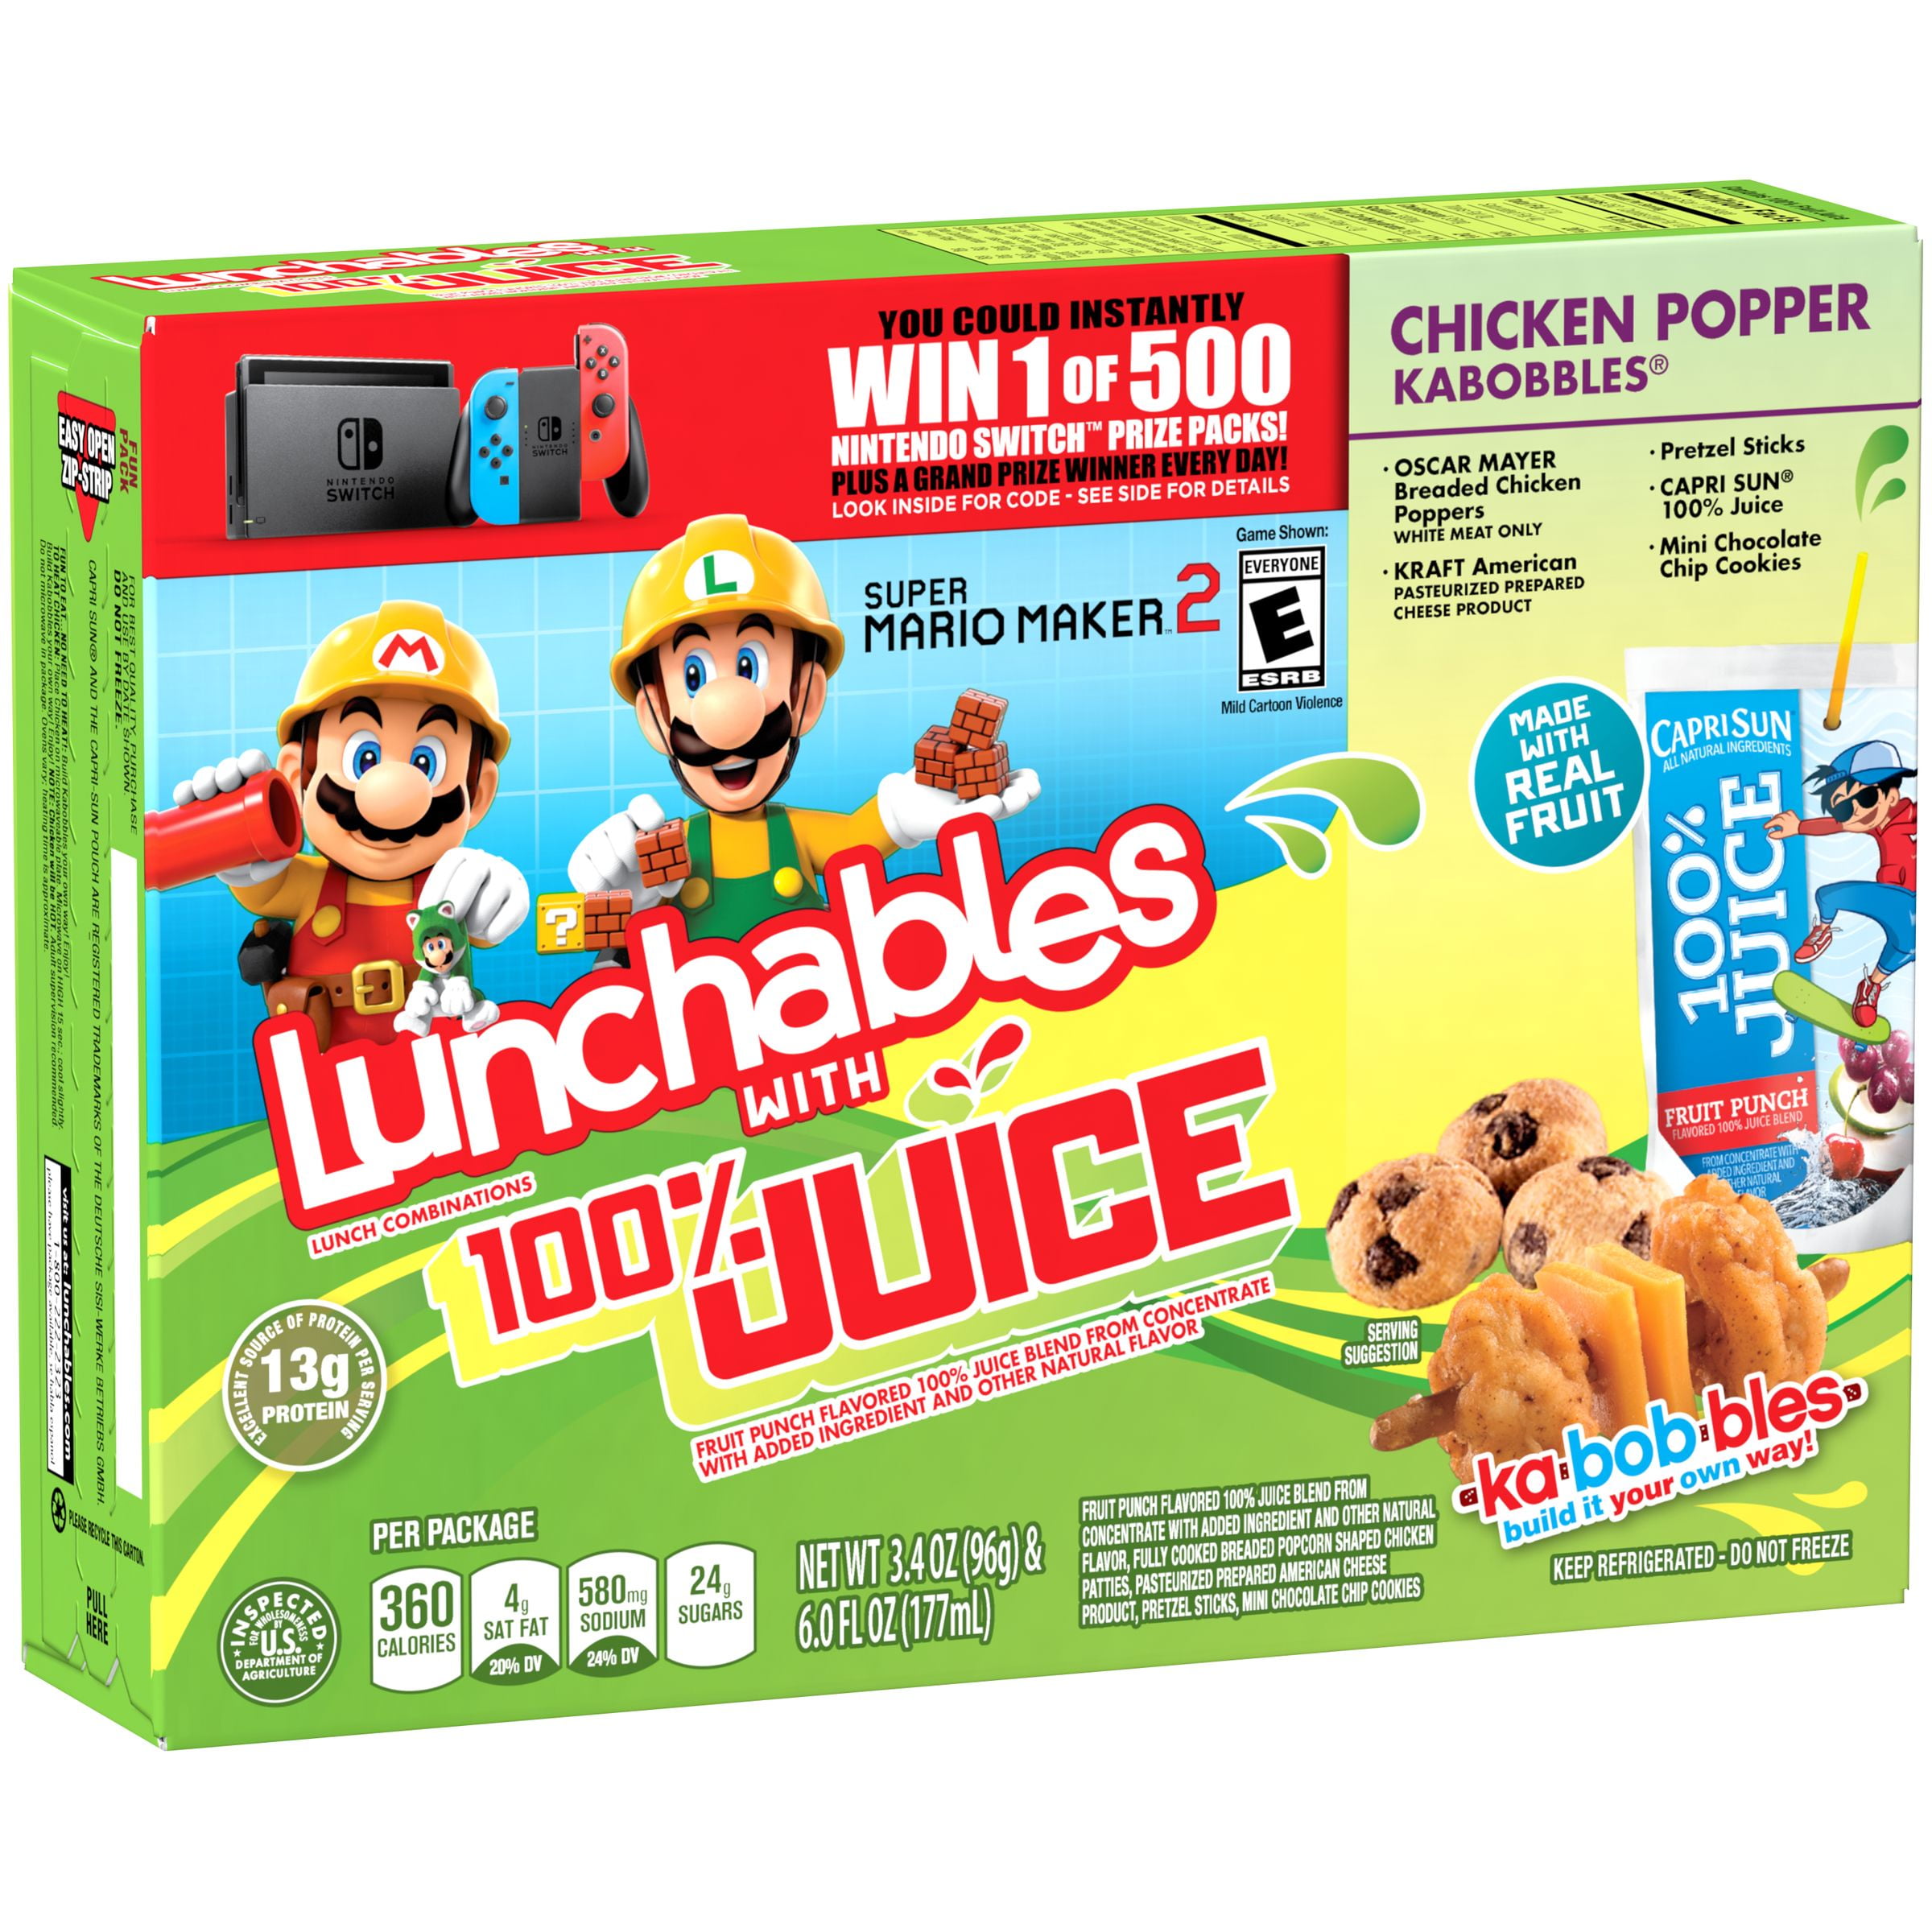 Lunchables Chicken Popper Kabobbles With 100% Juice, 9.4 oz Box